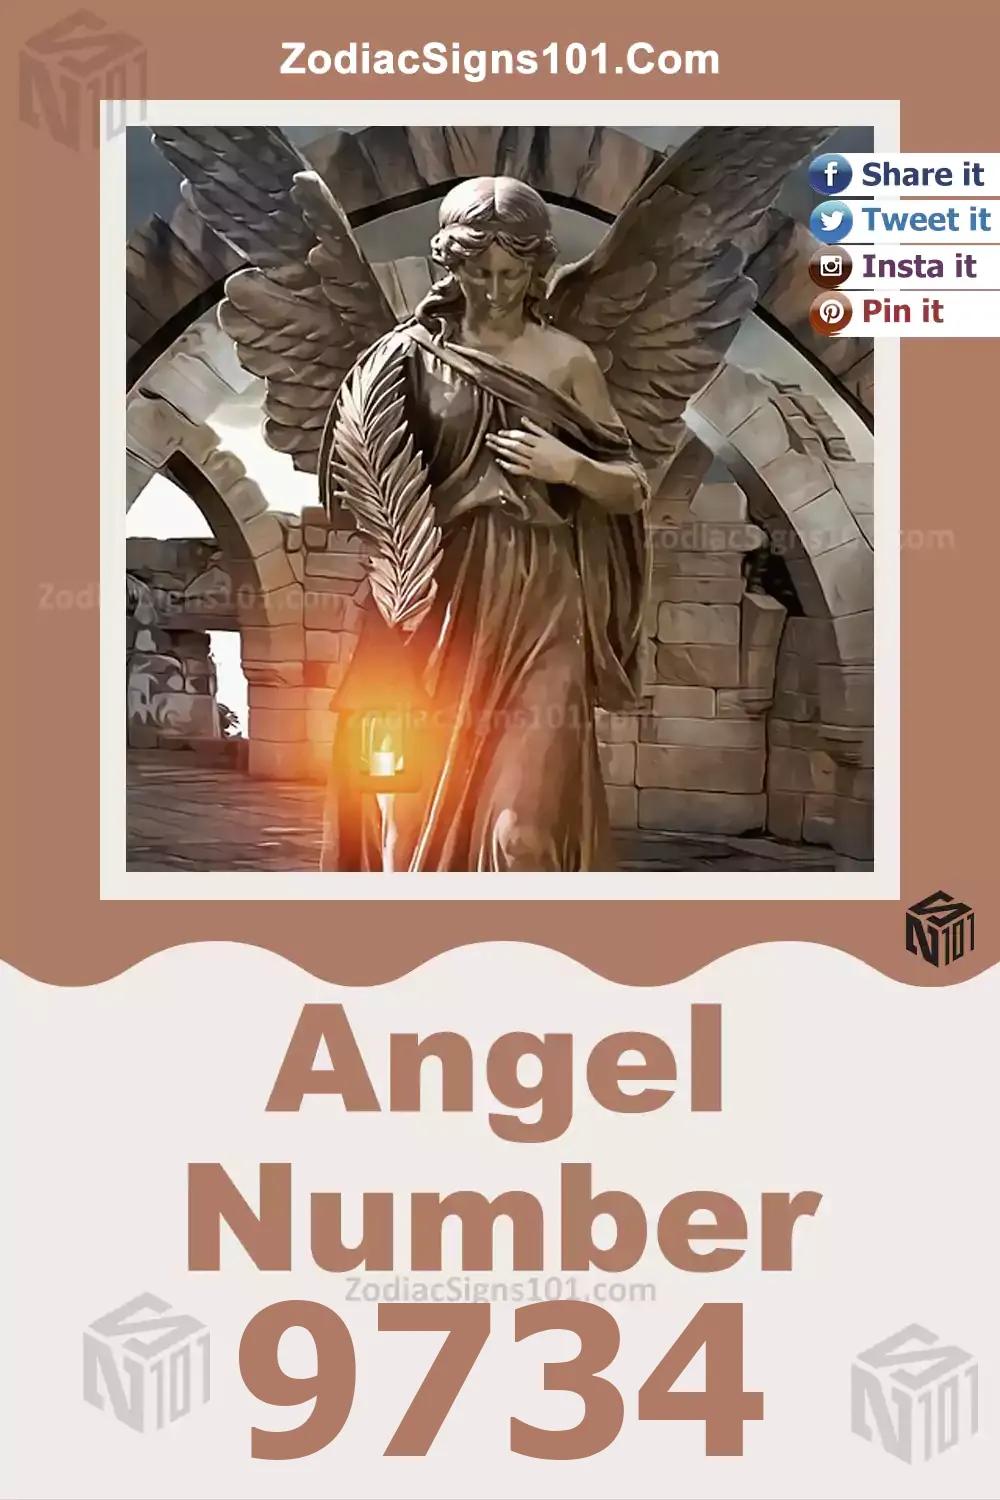 9734 Angel Number Meaning